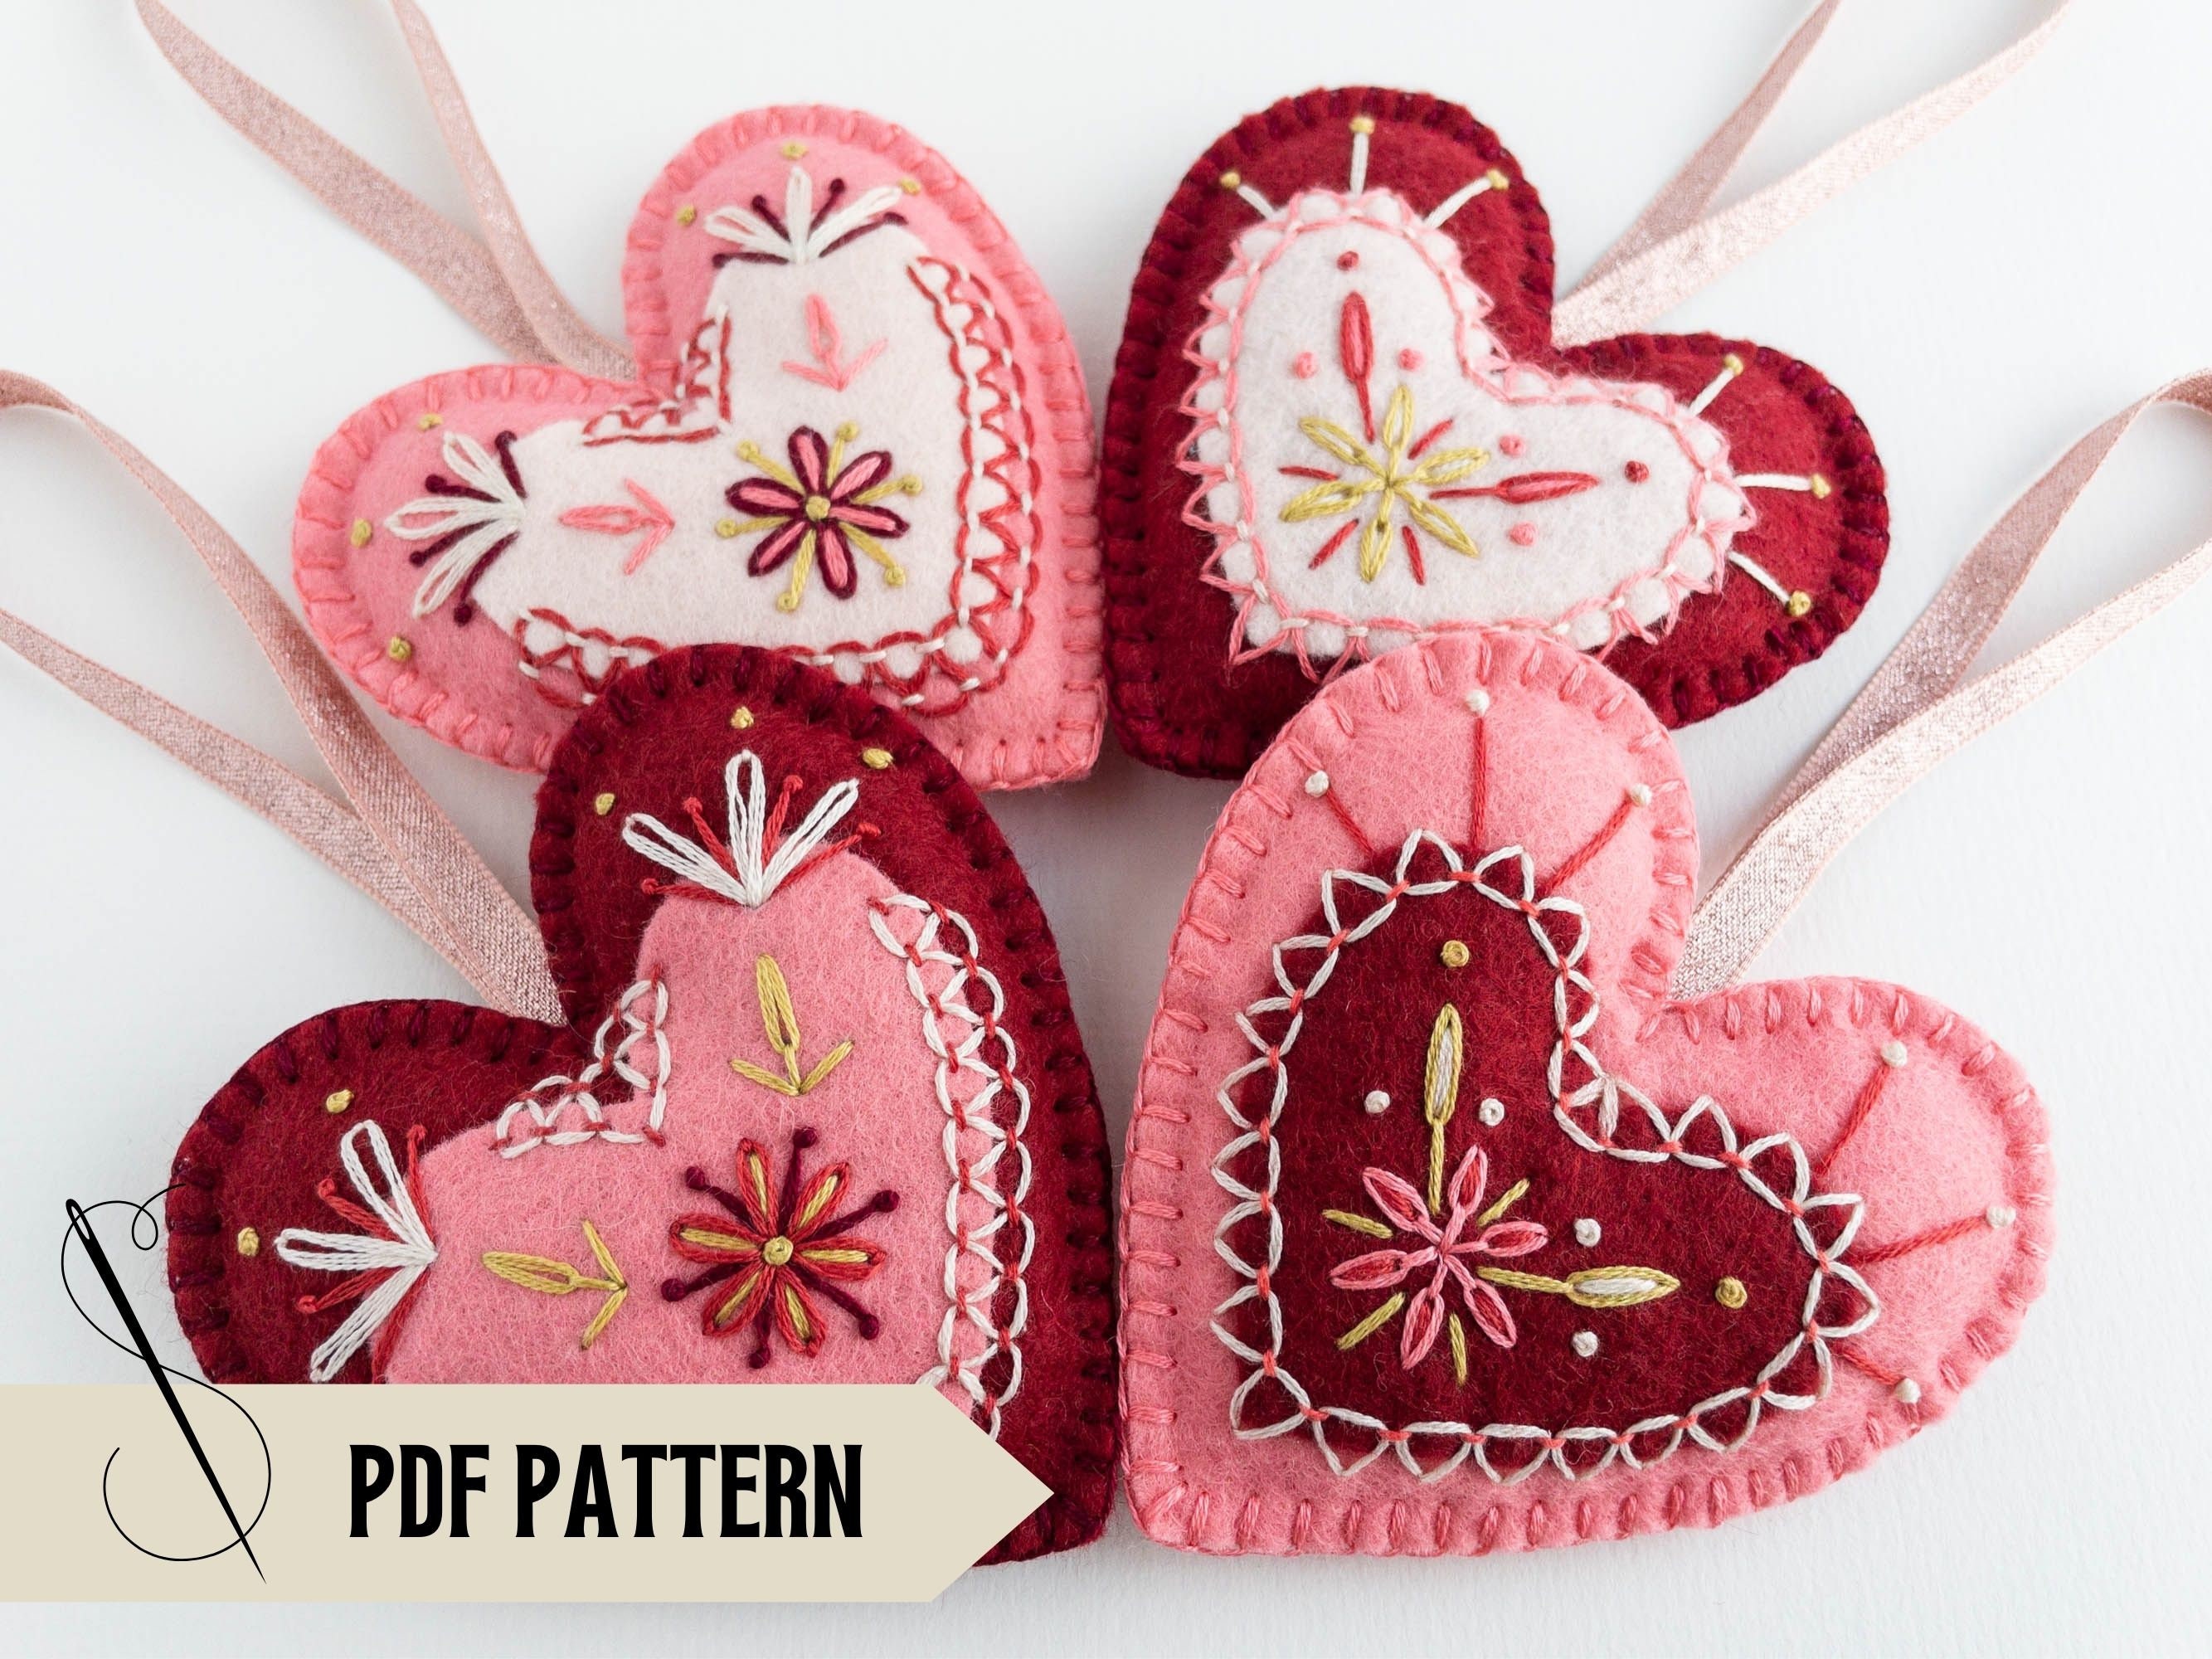 Heart Plush Ornament or Pillow Craft Made from Soft Felt - OMC